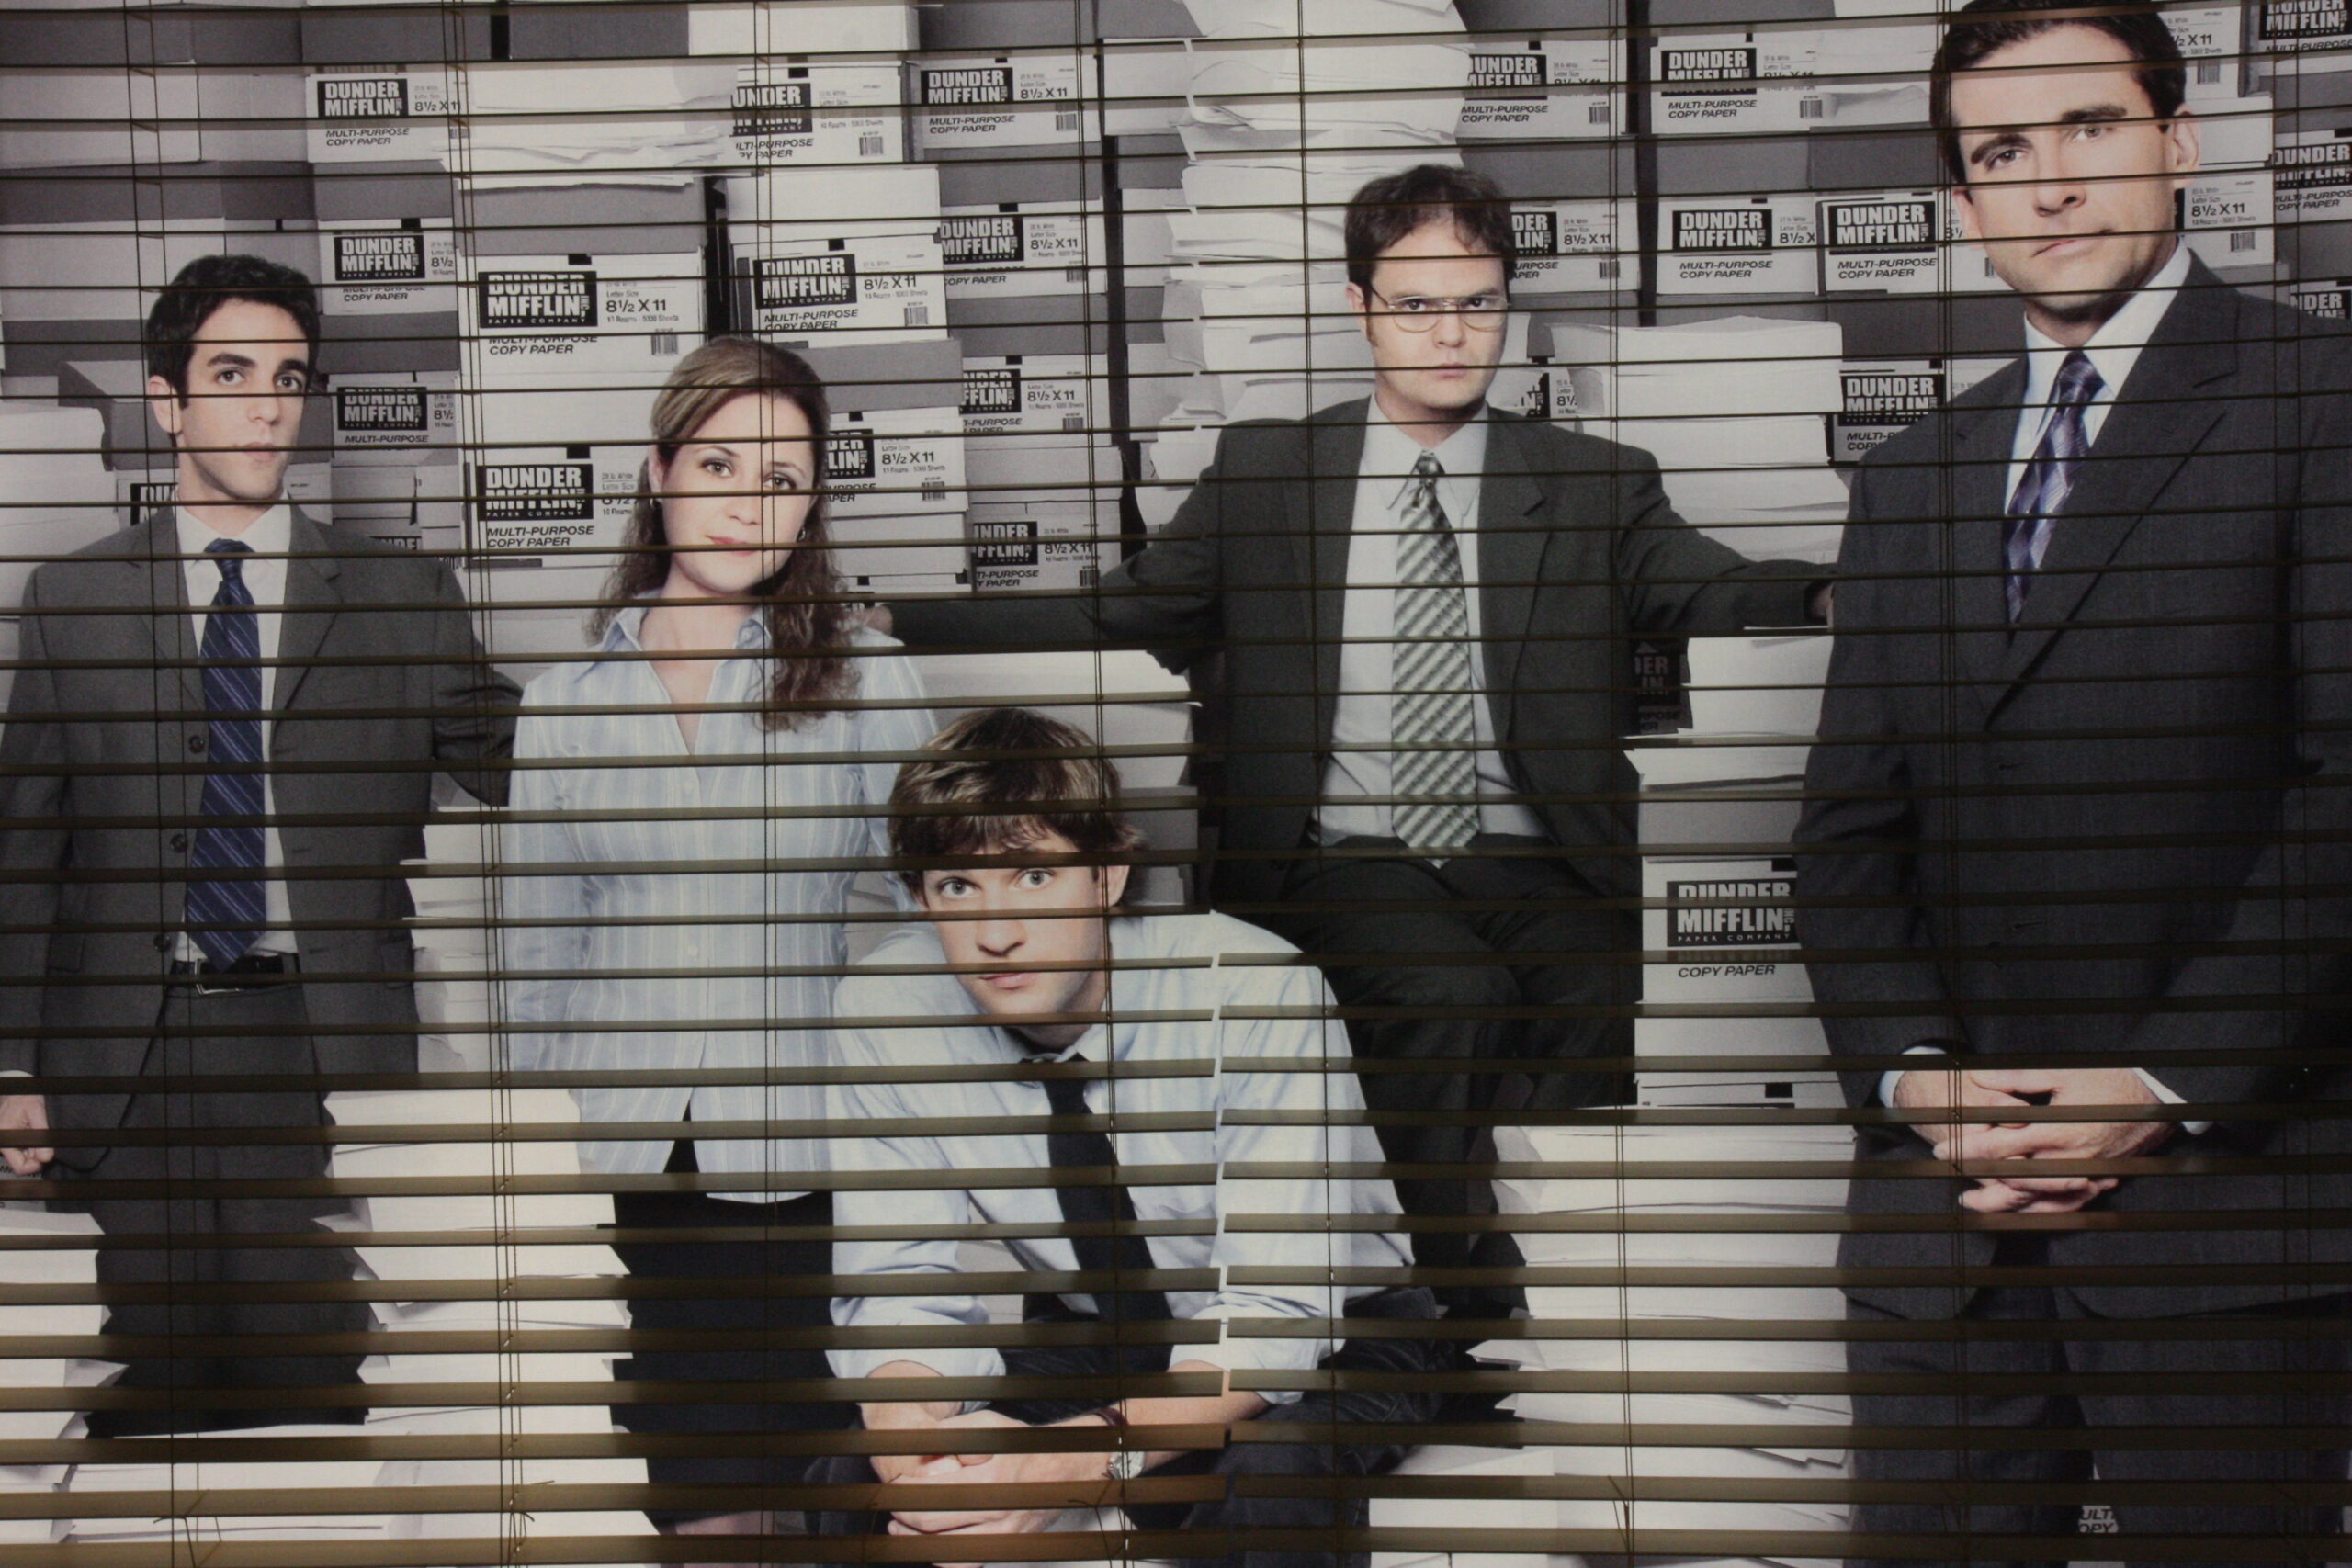 mural featuring 'The Office' cast members in stock room